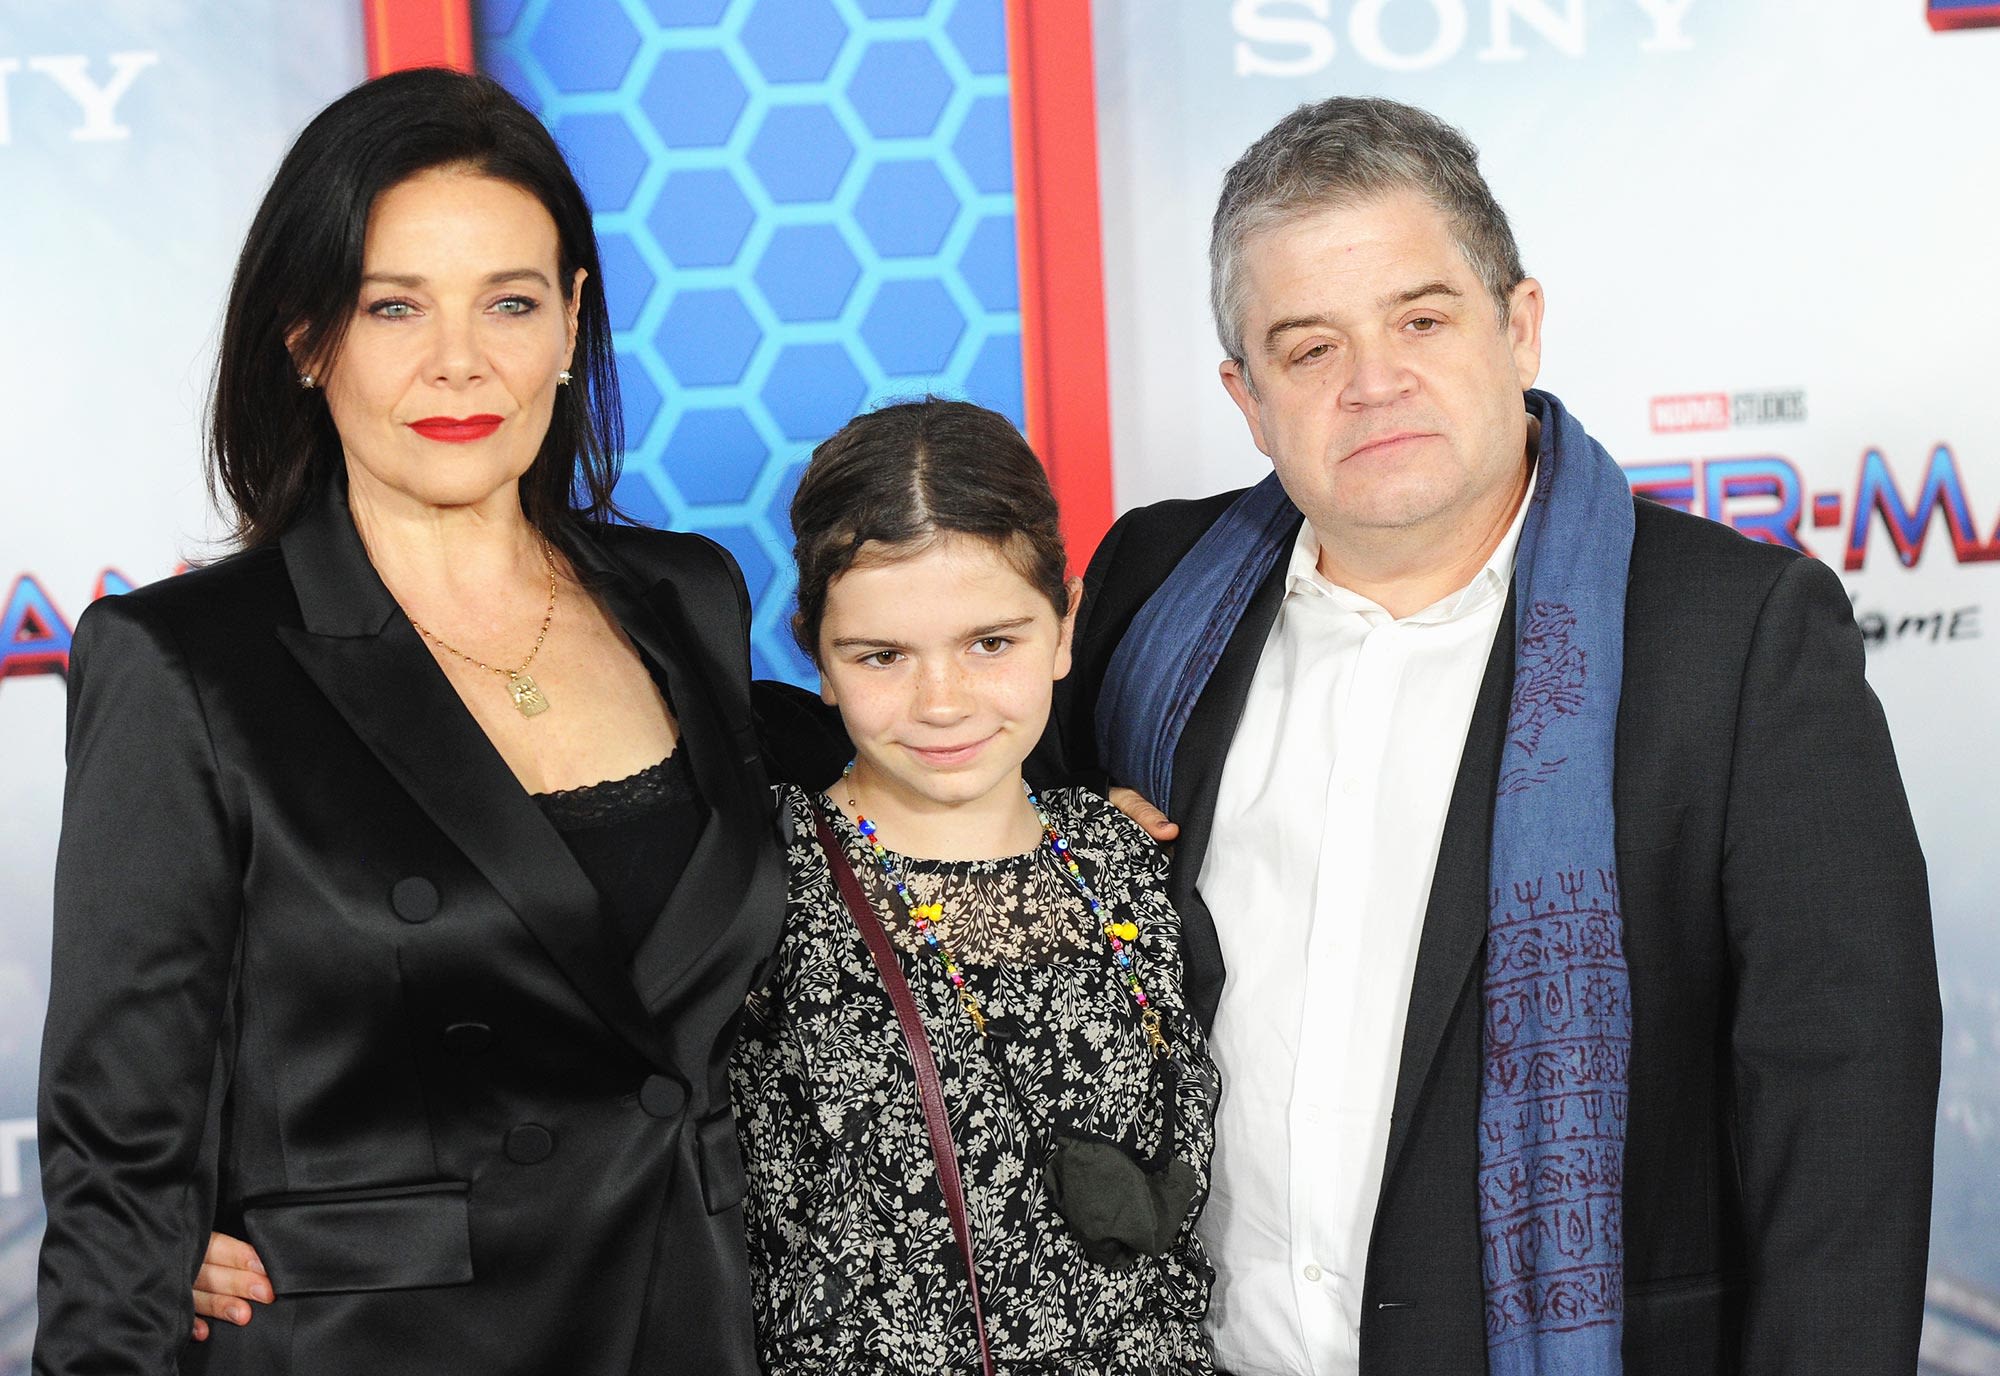 Patton Oswalt Loves Having ‘Daddy-Daughter Times’ When Wife Meredith Salenger Travels